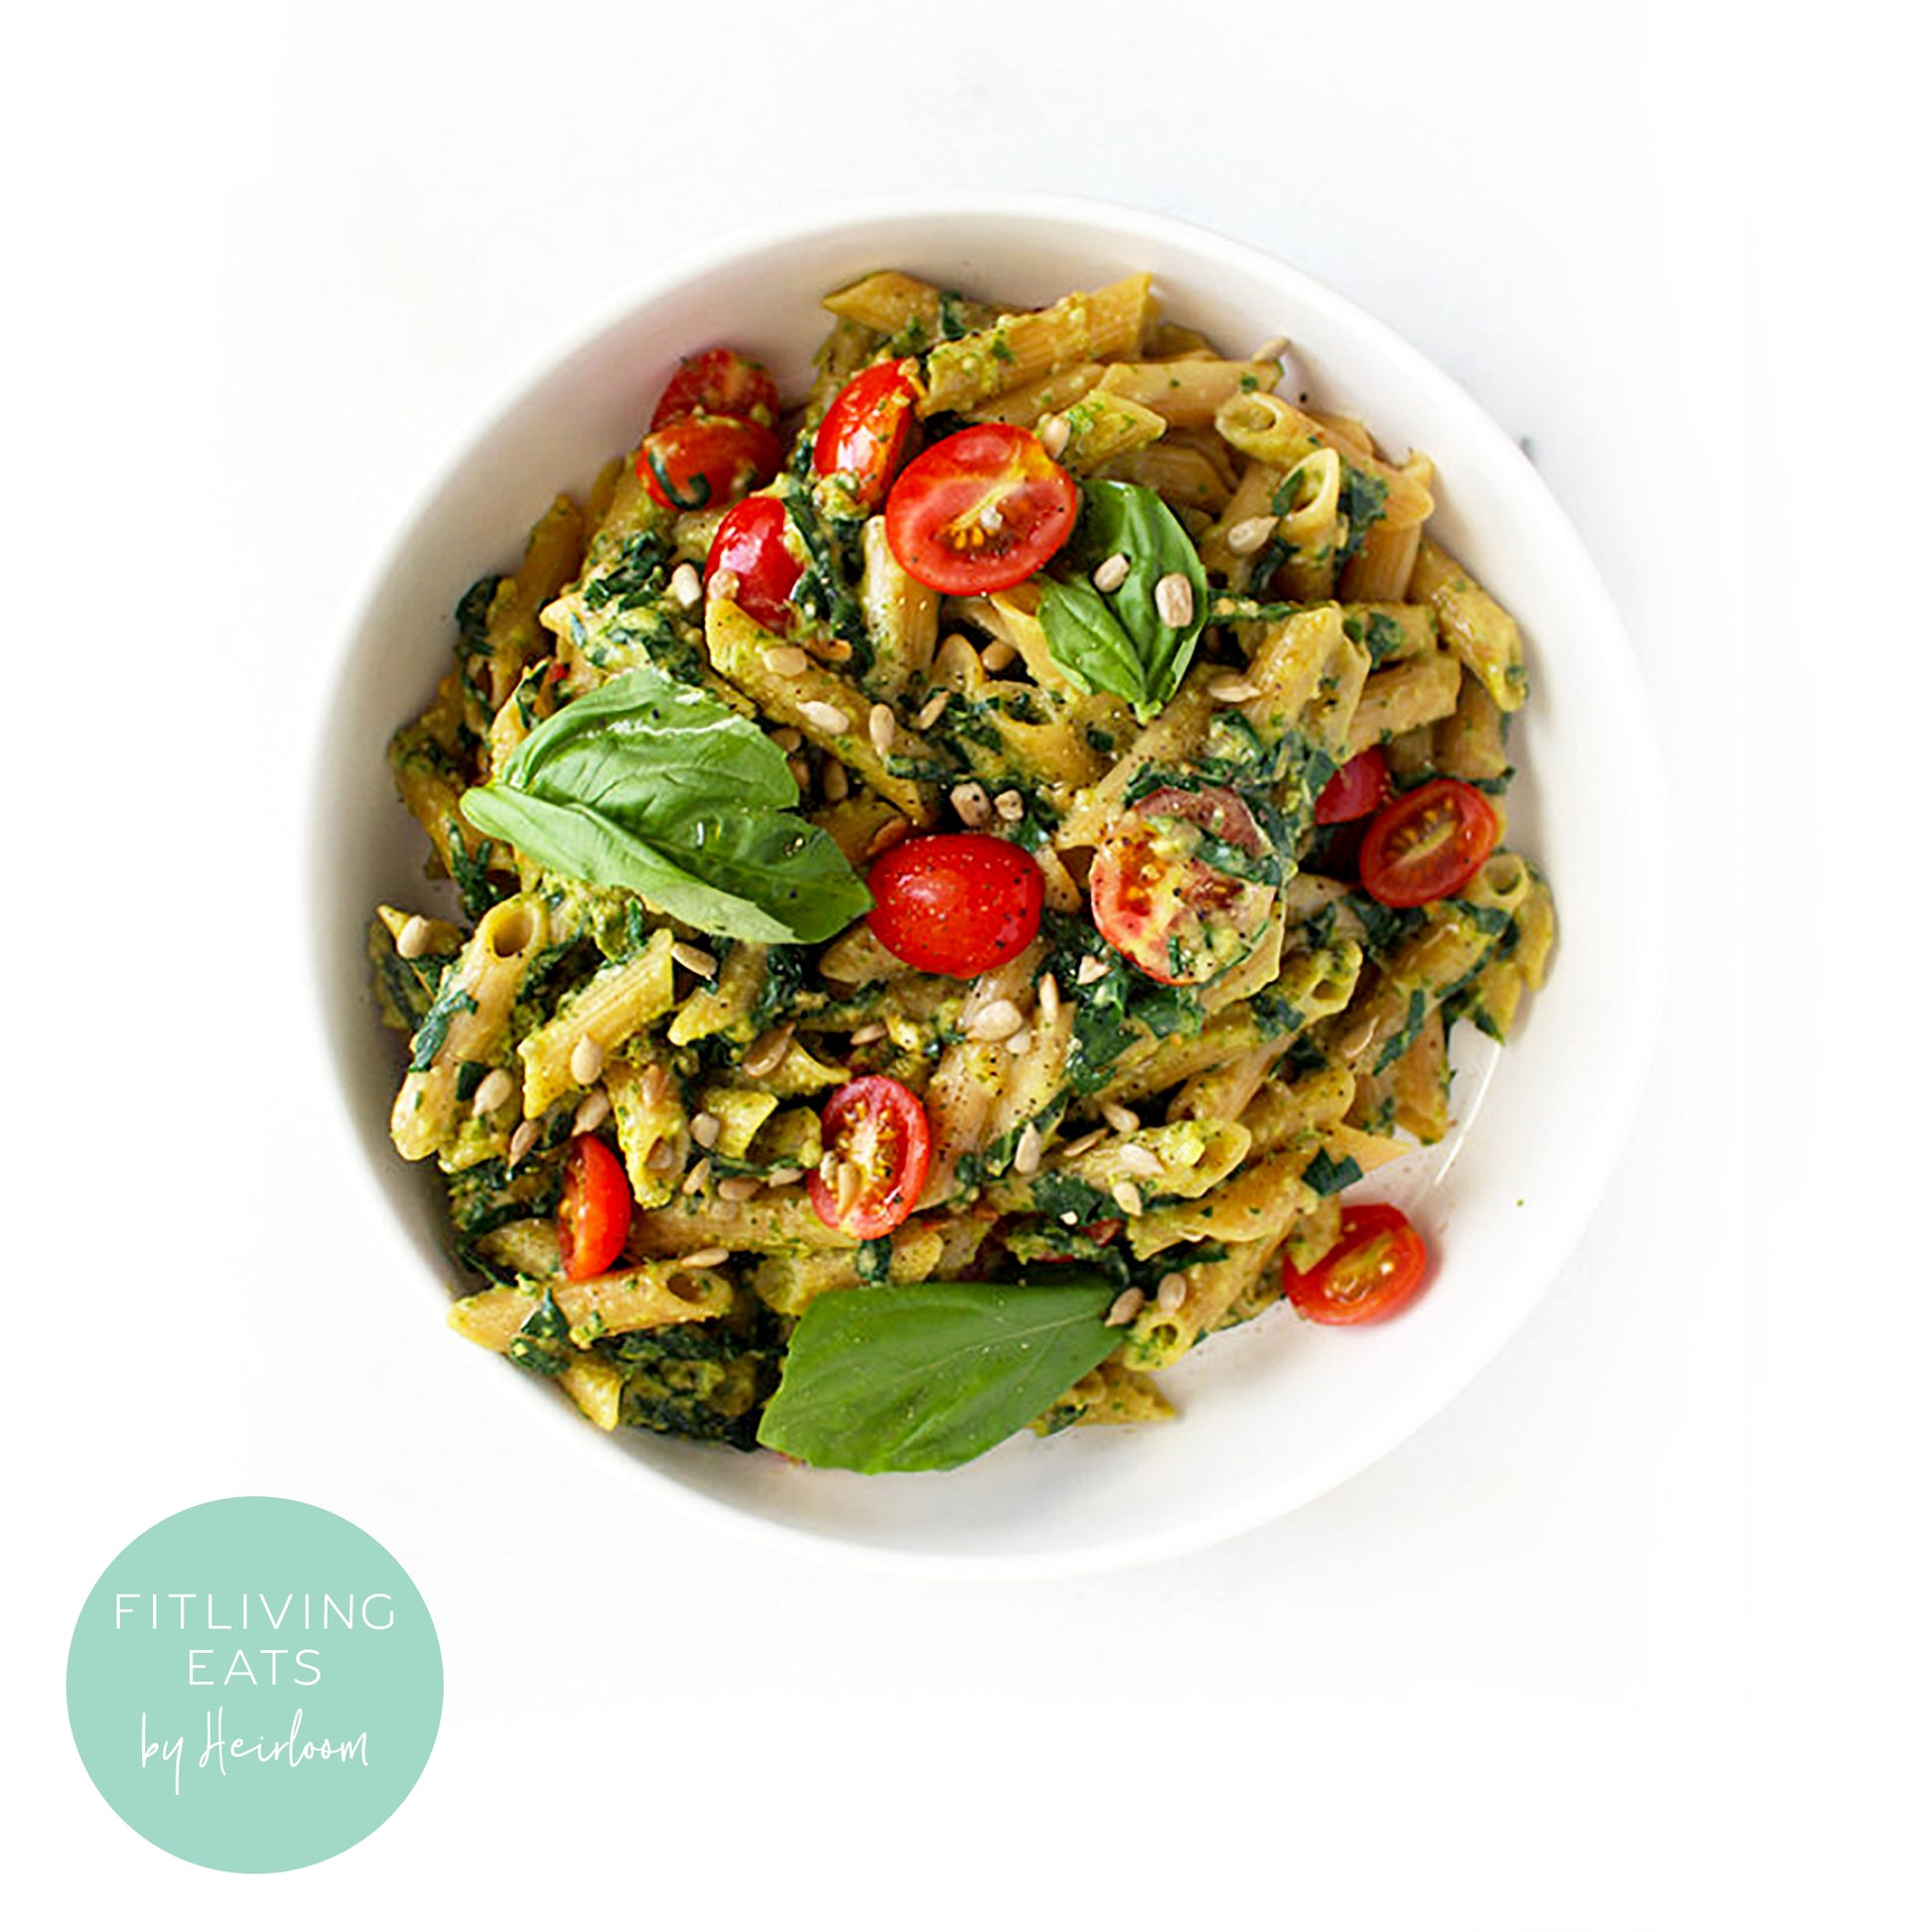 red lentil rotini, sunflower seed pesto, grape tomatoes, zucchini, healthy meal prep company